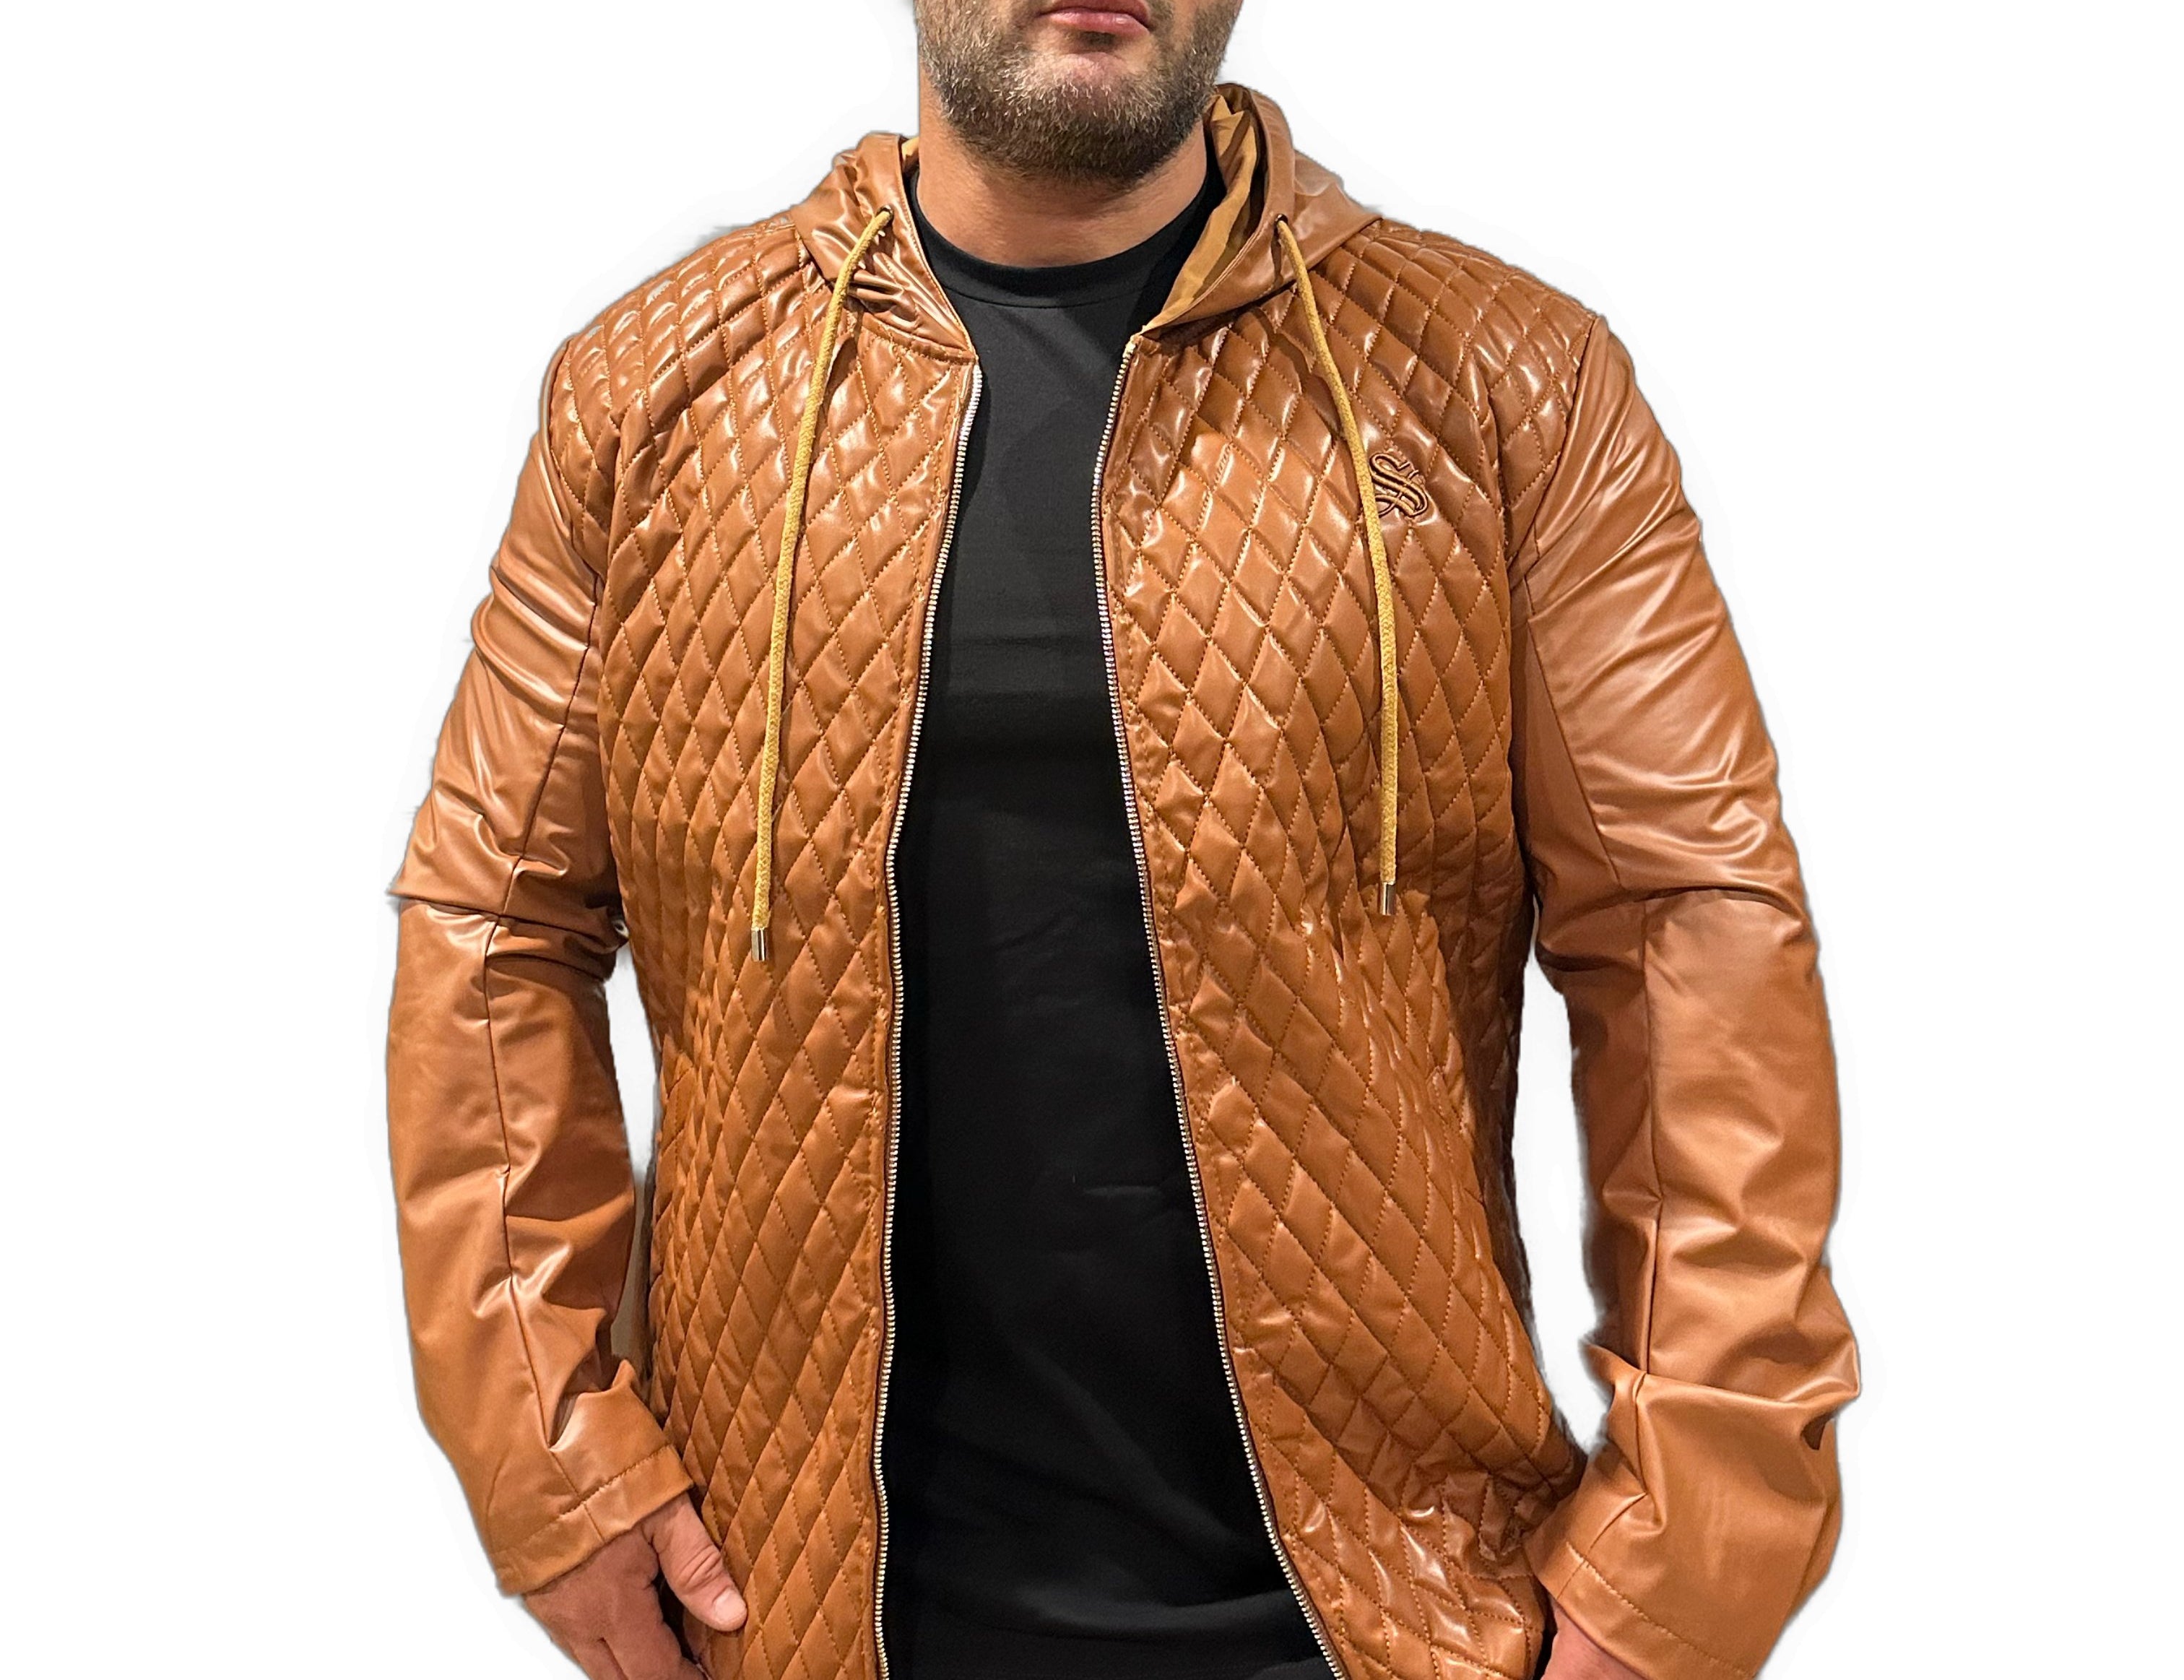 Robin 2 - Brown Jacket for Men - Sarman Fashion - Wholesale Clothing Fashion Brand for Men from Canada